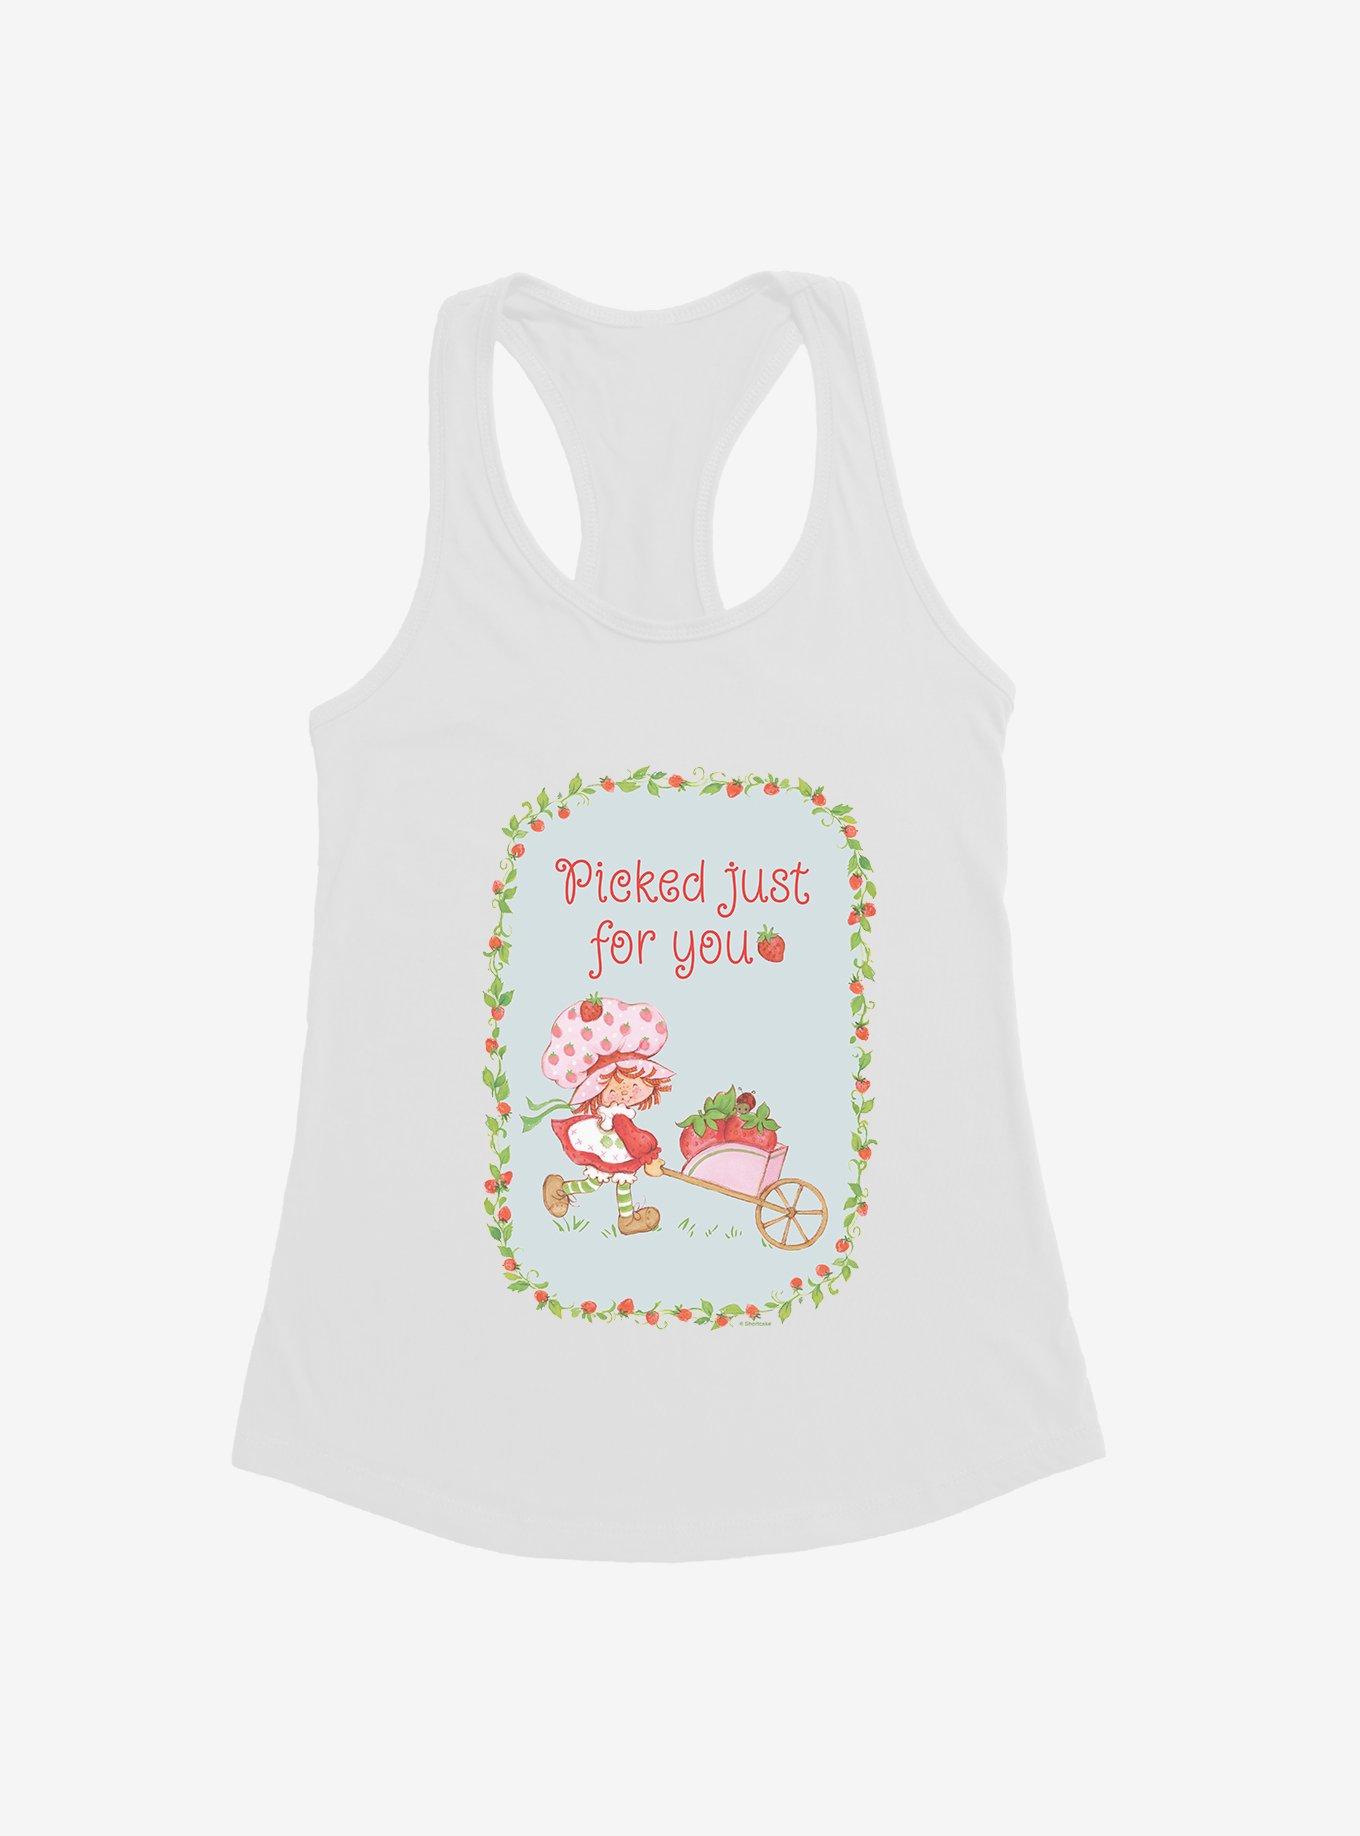 Strawberry Shortcake Picked Just For You Womens Tank Top, WHITE, hi-res